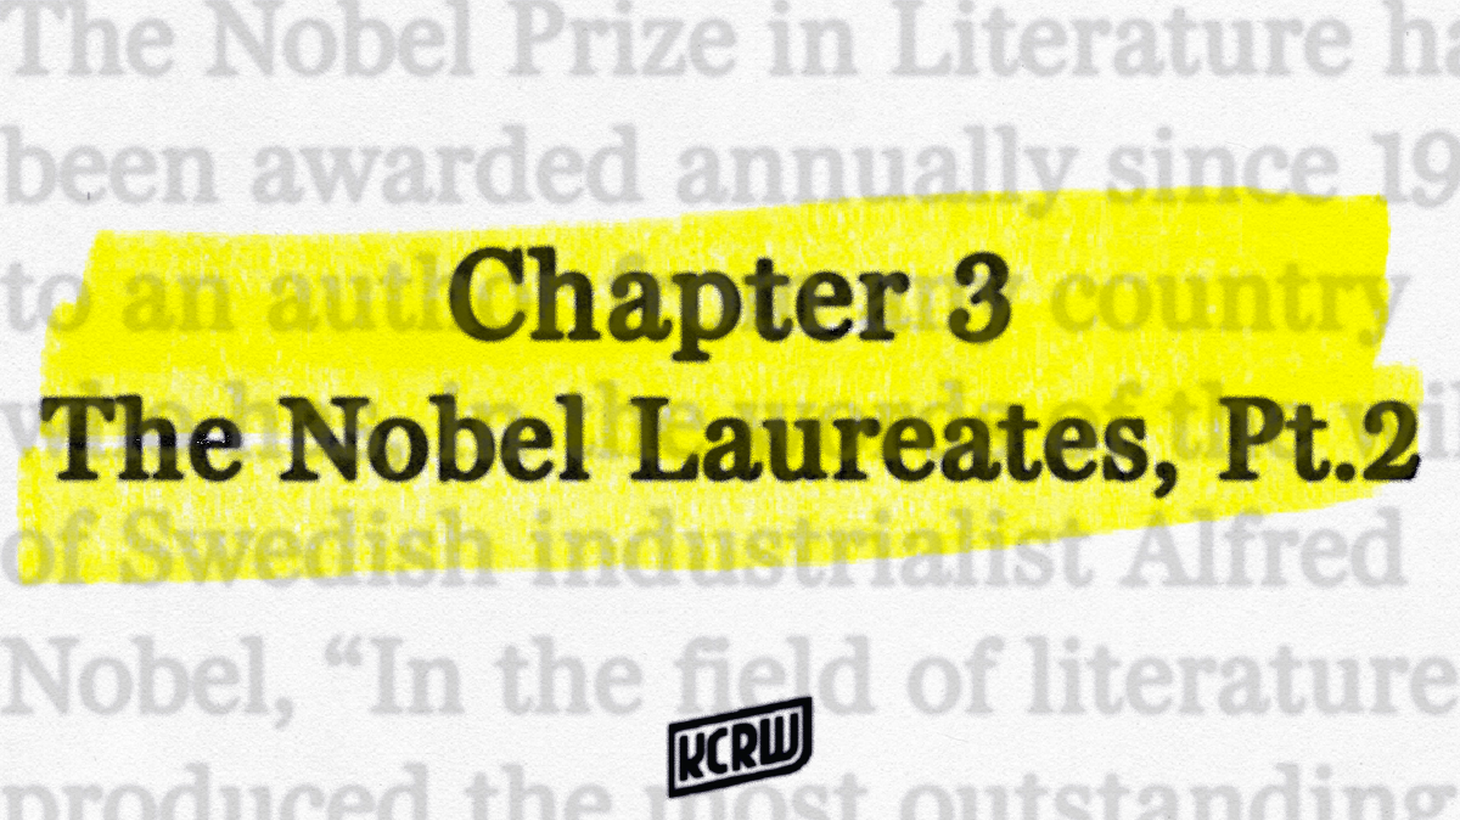 The Nobel Prize in Literature has been awarded annually since 1901 to an author from any country who has, in the words of the will of Swedish industrialist Alfred Nobel, “In the field of literature produced the most outstanding work in an idealistic direction.” Michael Silverblatt spoke with eight Nobel Prize laureates. In part 1 of the Laureates show, we heard from four of them. In this second part, we’ll be hearing excerpts from: Kazuo Ishiguro, Mario Vargas Llosa, Doris Lessing, Czesław Miłosz, and Robert Hass speaking about Milosz.